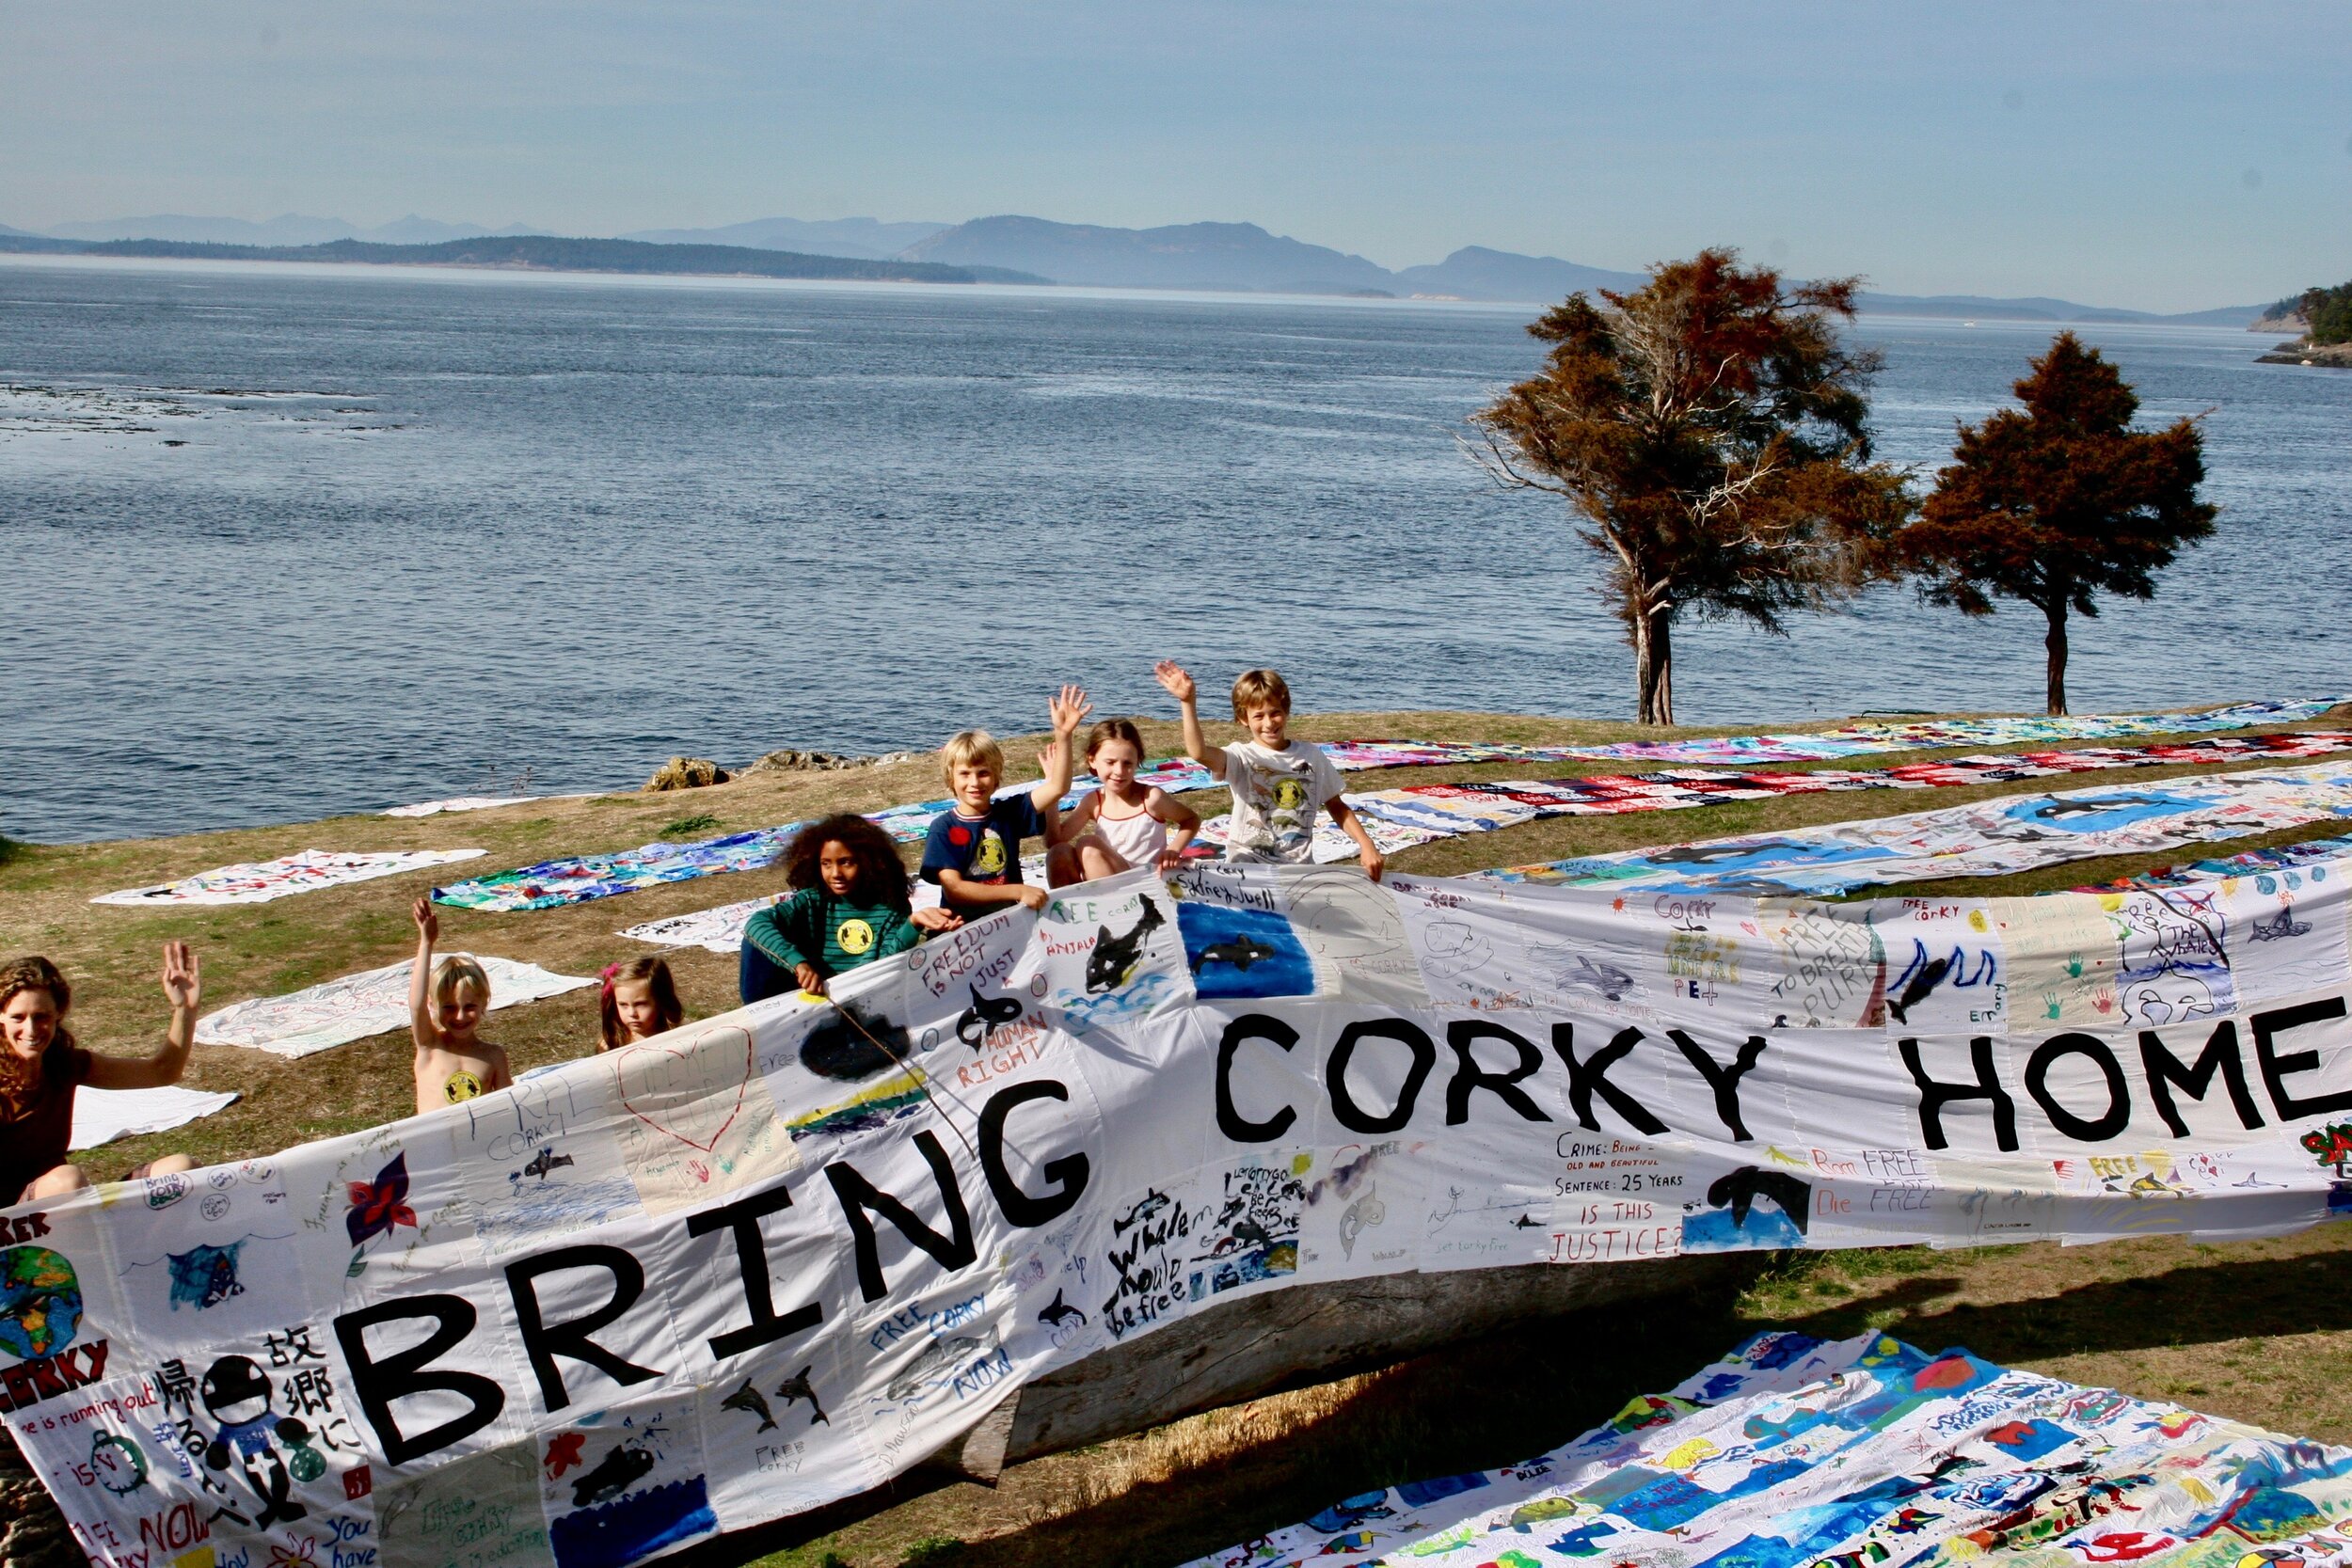 Bring Corky Home Banner - photo by Michael Reppy